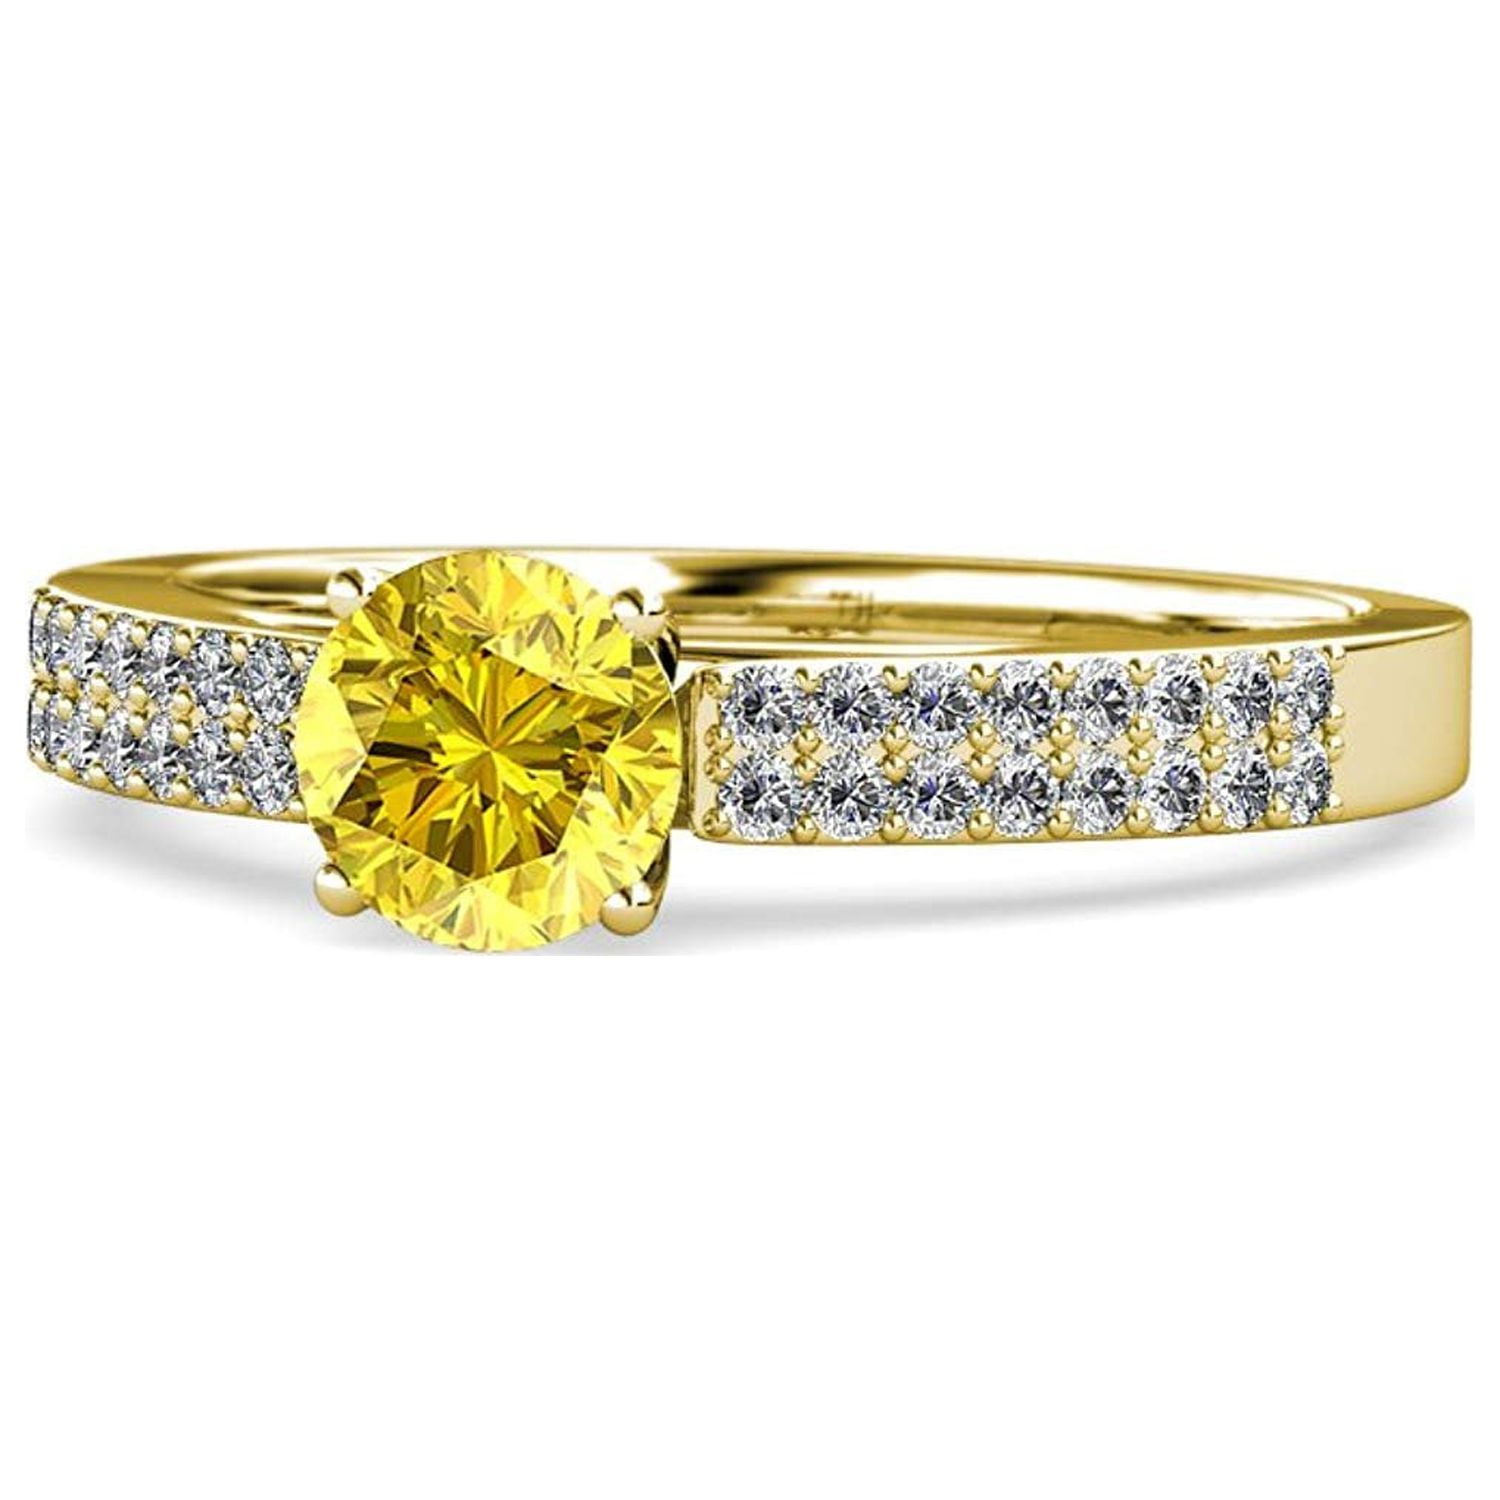 Double Row Prong Set Round Diamond Ring in Two-Tone 14k White and Yellow  Gold